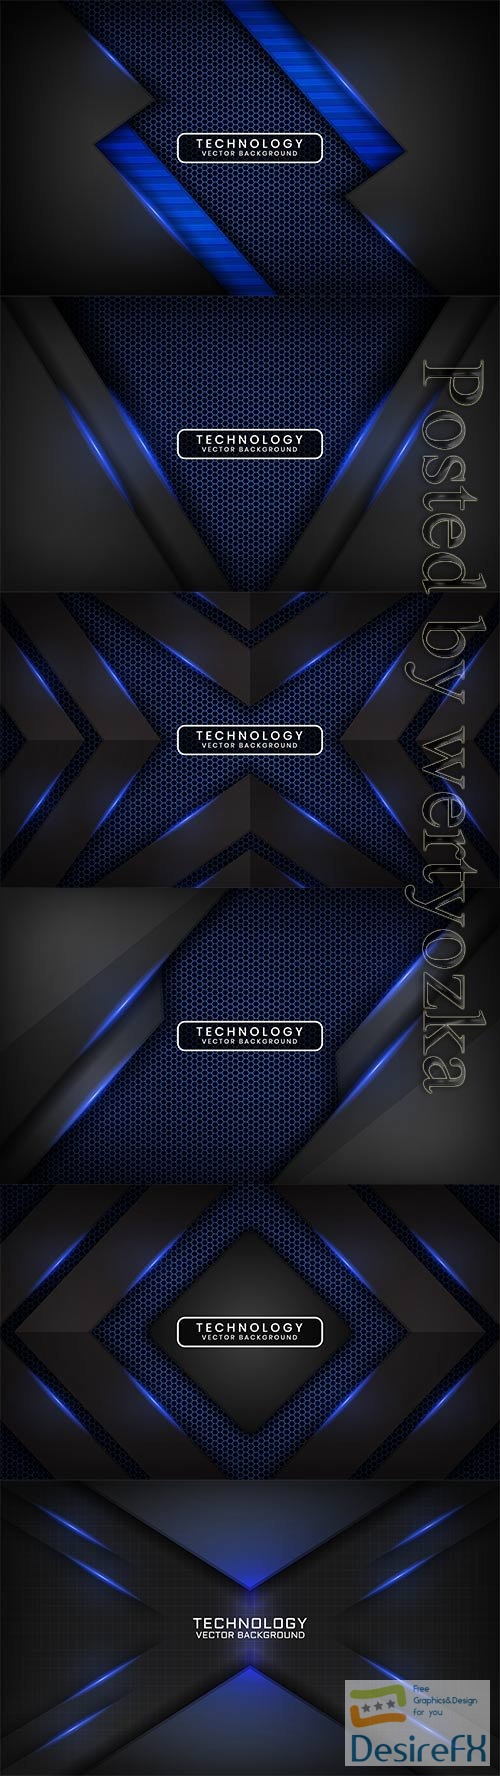 Abstract 3d dark and blue technology vector background